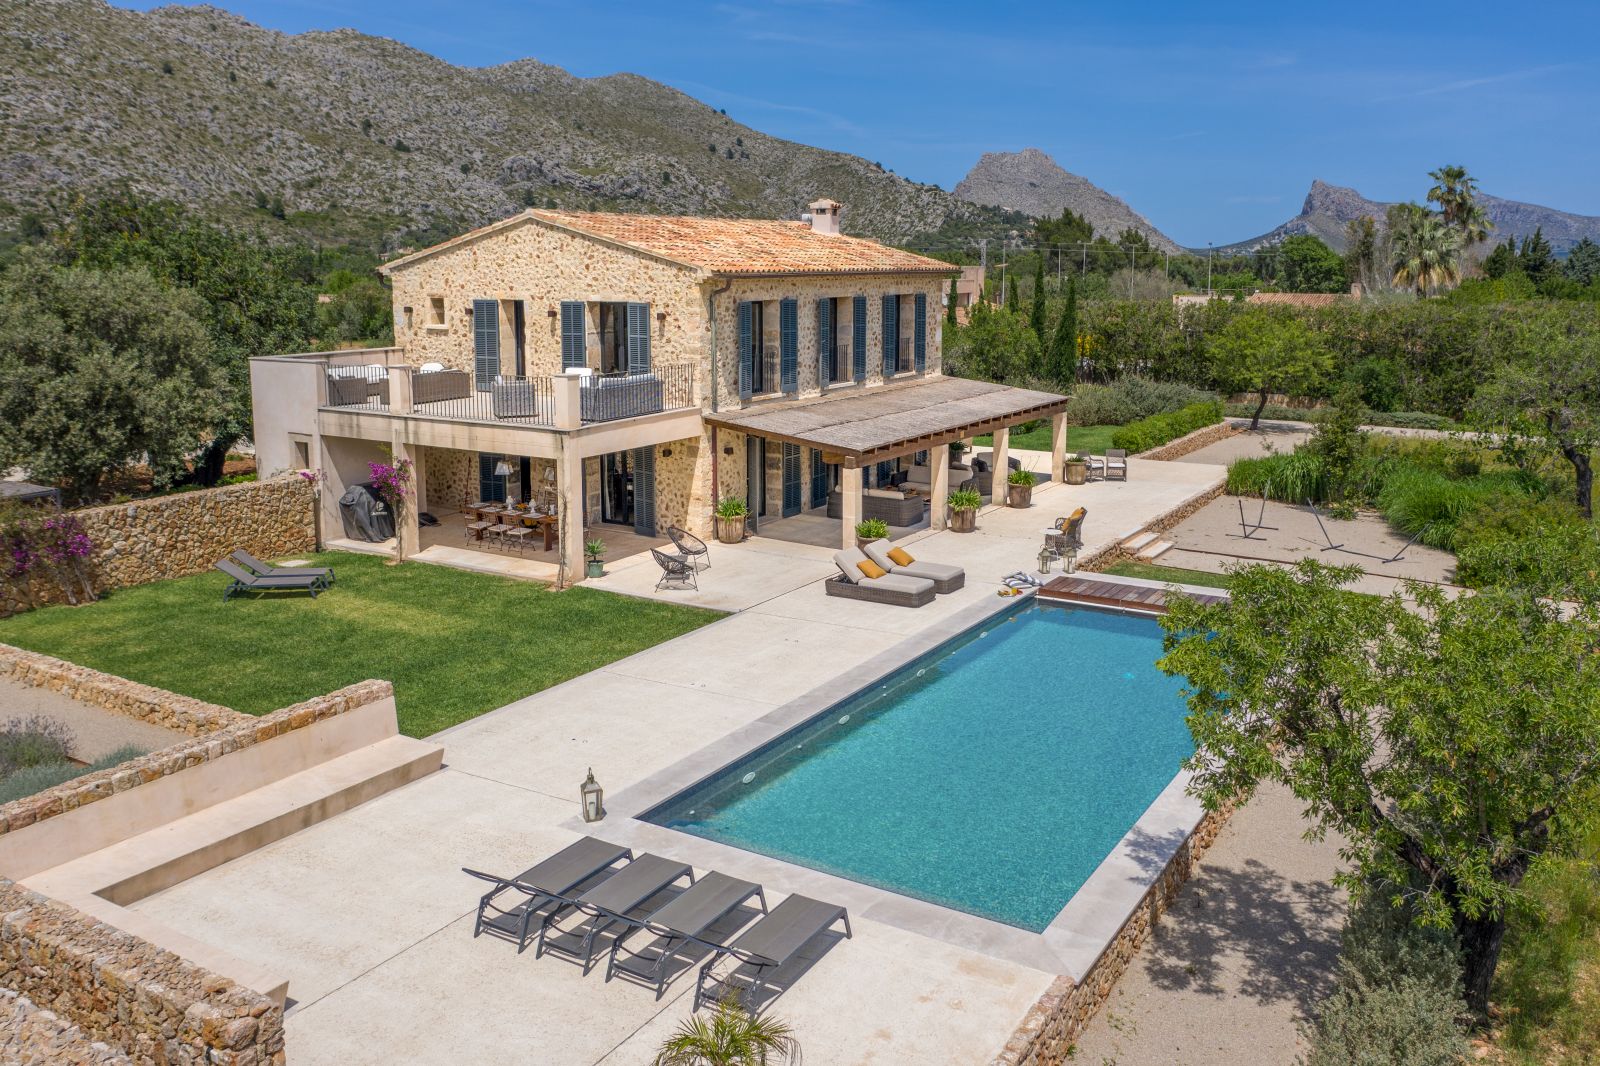 Purchasing a Property in Mallorca